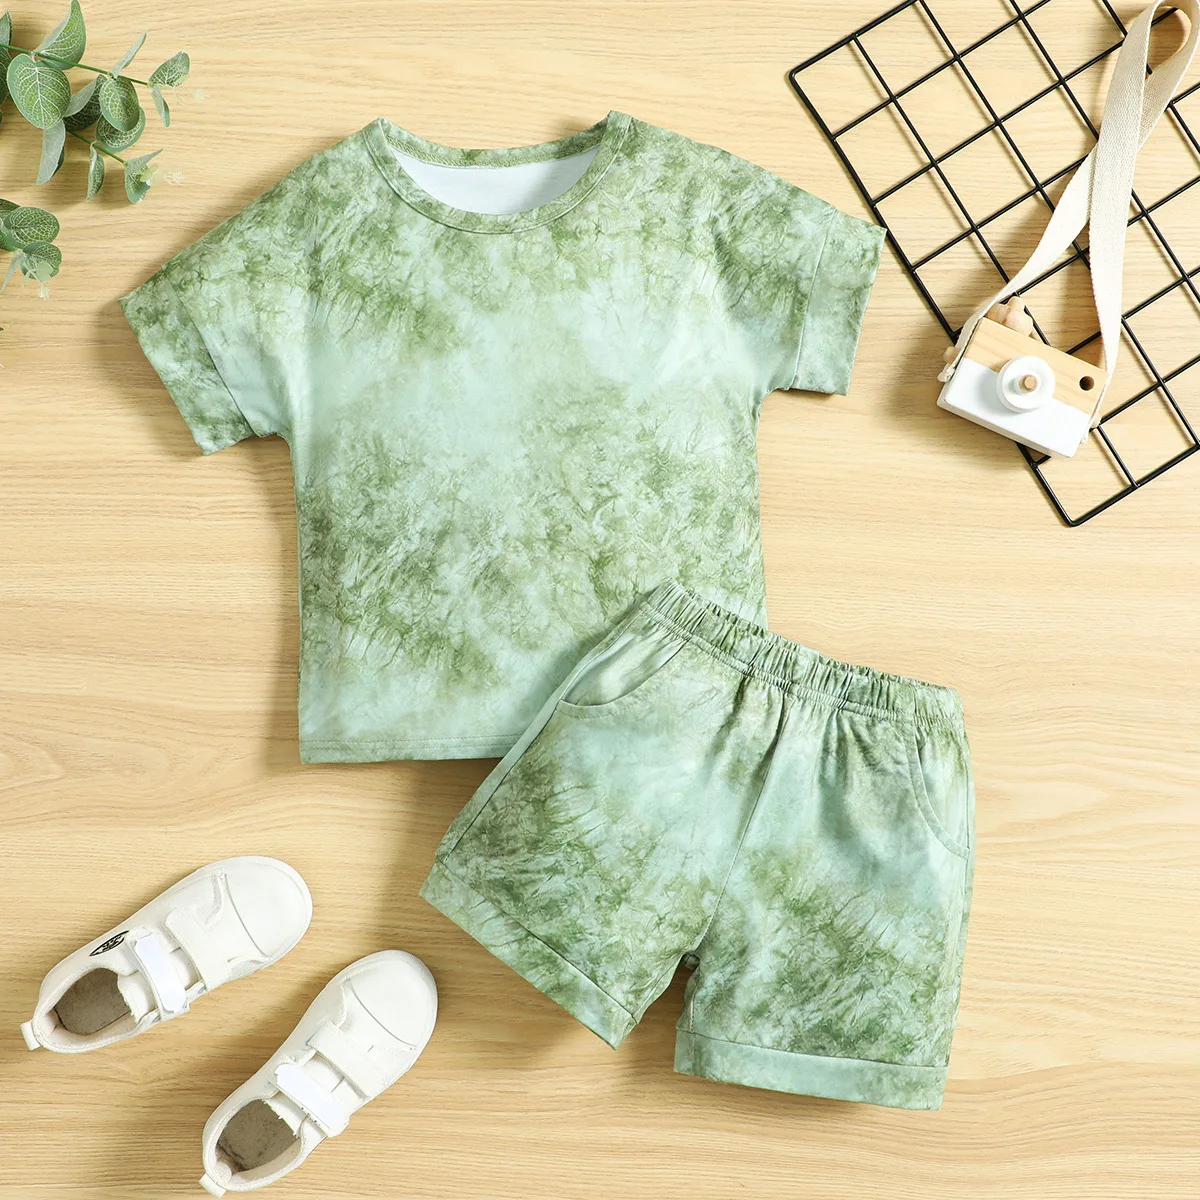 New fashion summer children tie-dye outfits girl's sports suit biker shorts set casual two-piece clothing set for girls